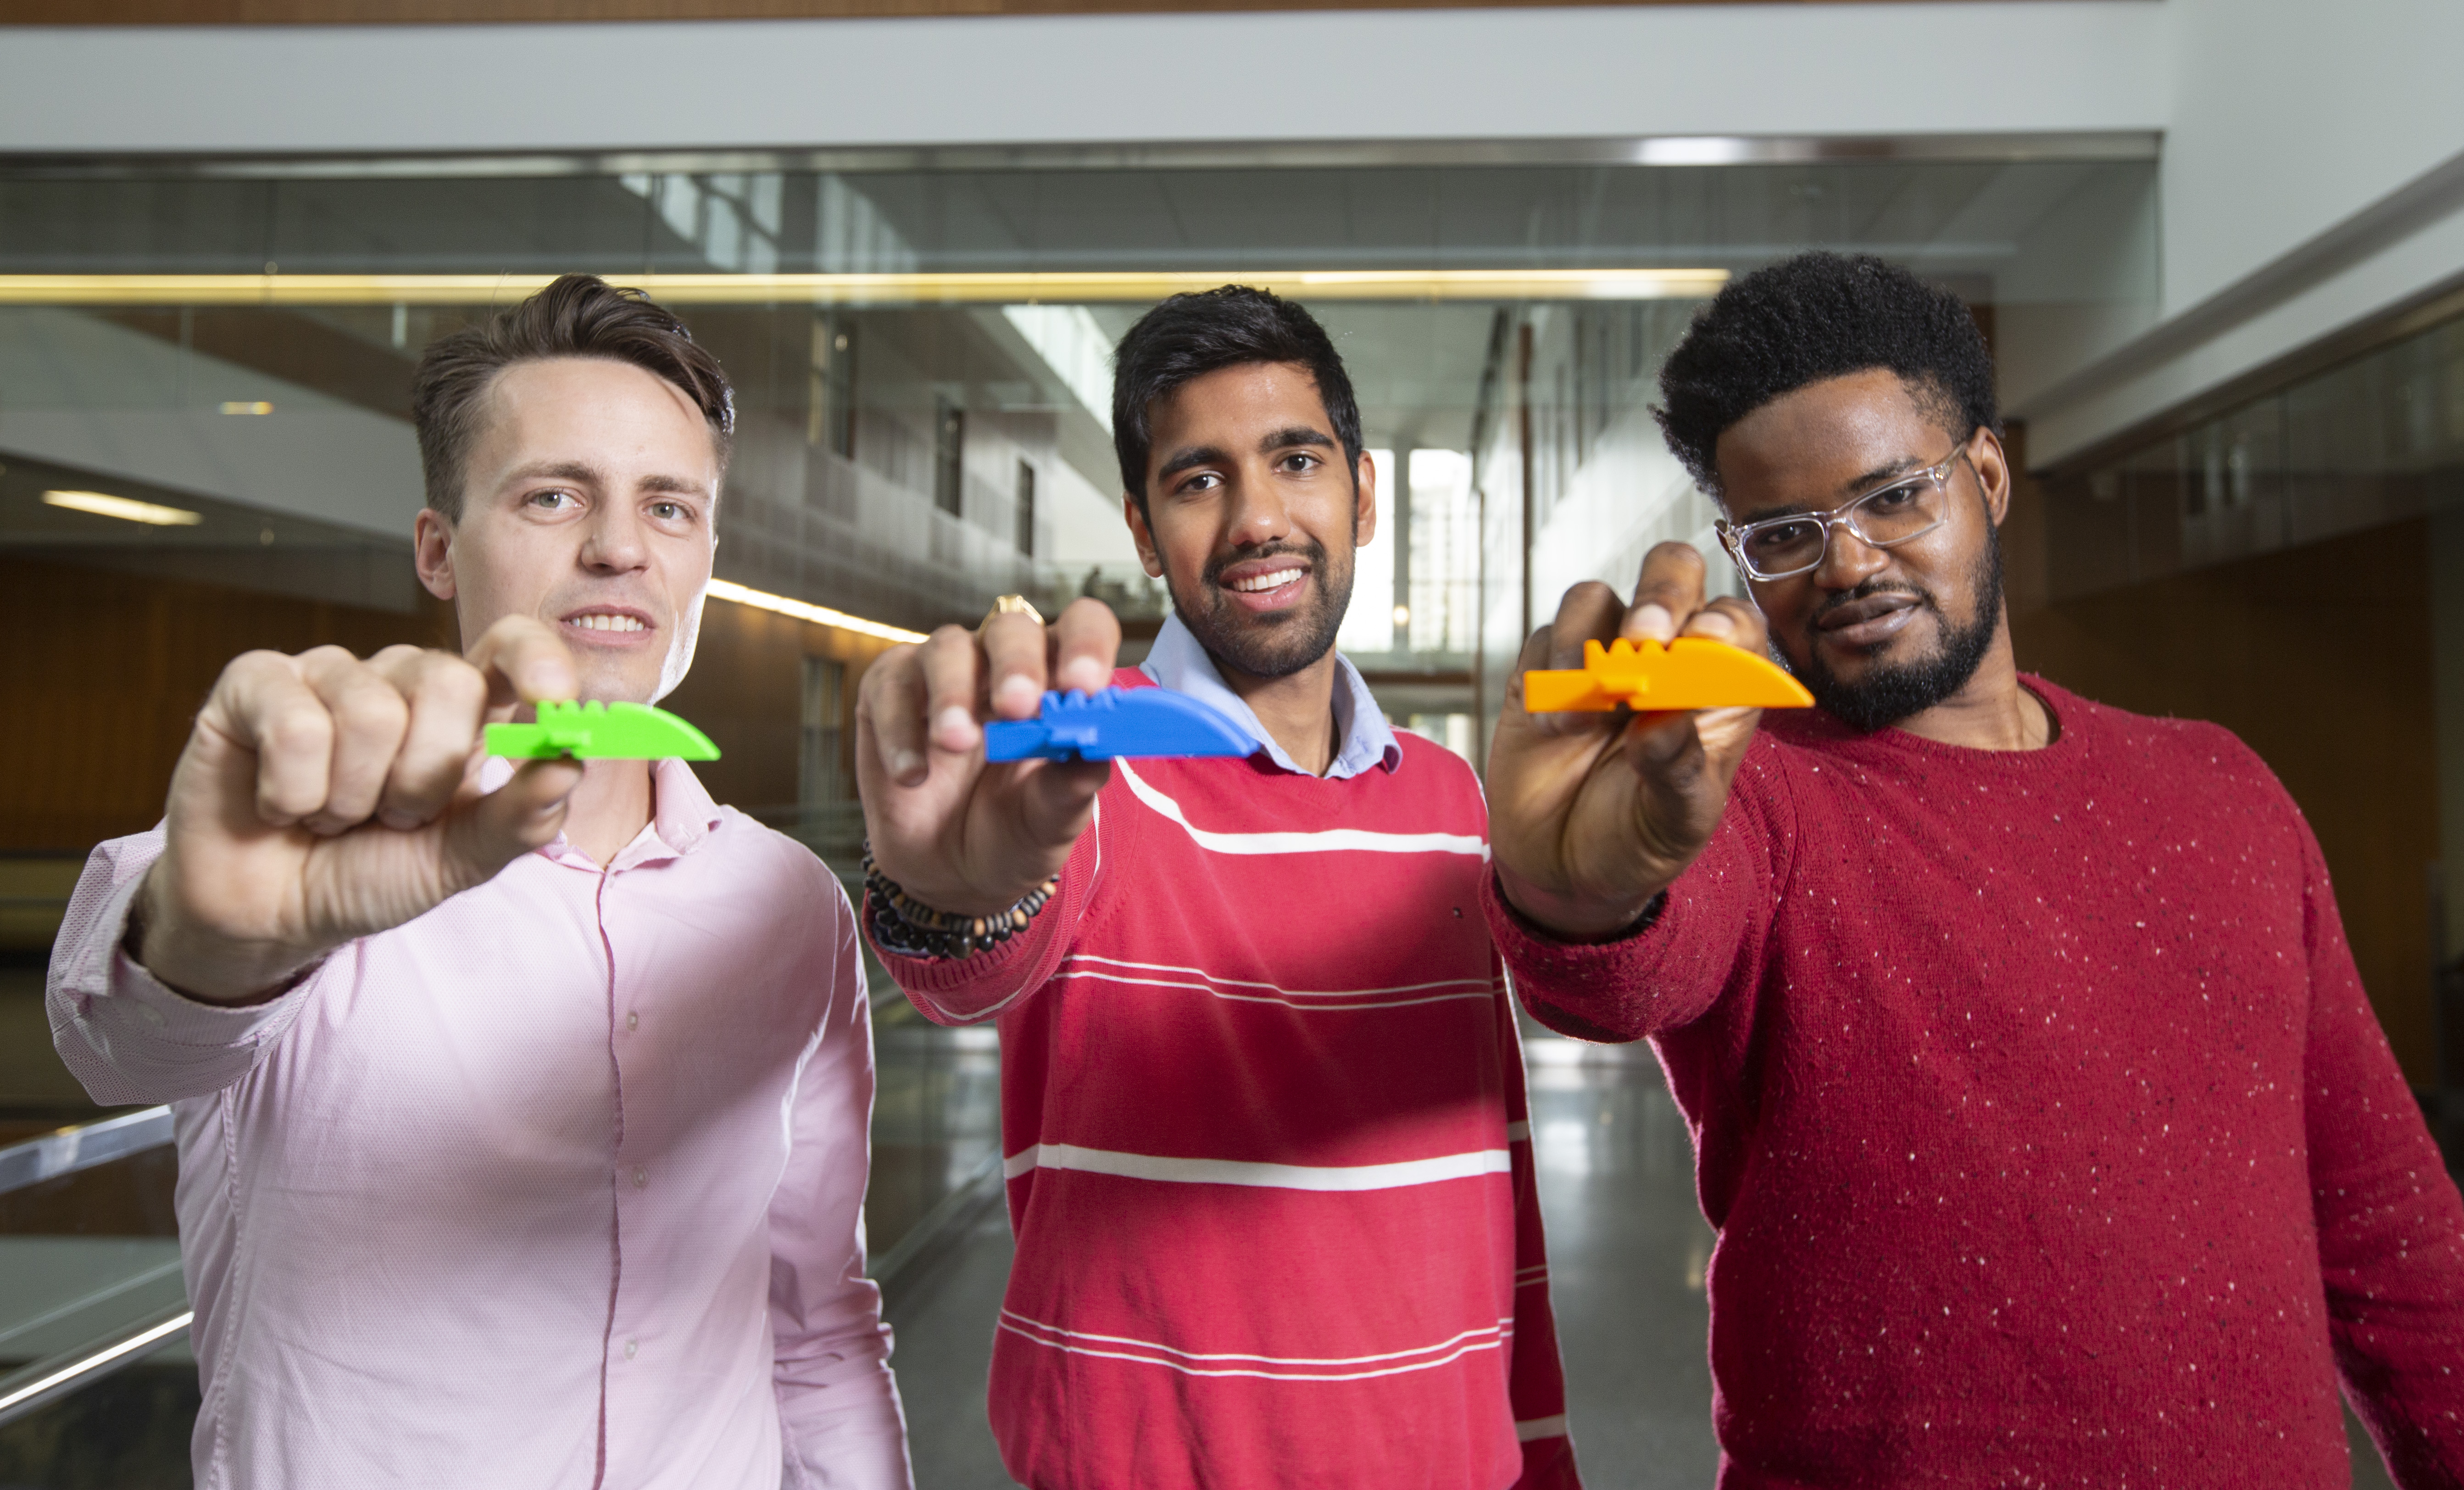 Soteria MedTech co-founders Cuylar Conly, Yash Shukla and Udoka Okpalauwaekwe hold a Lego-like airway device that could help save lives.